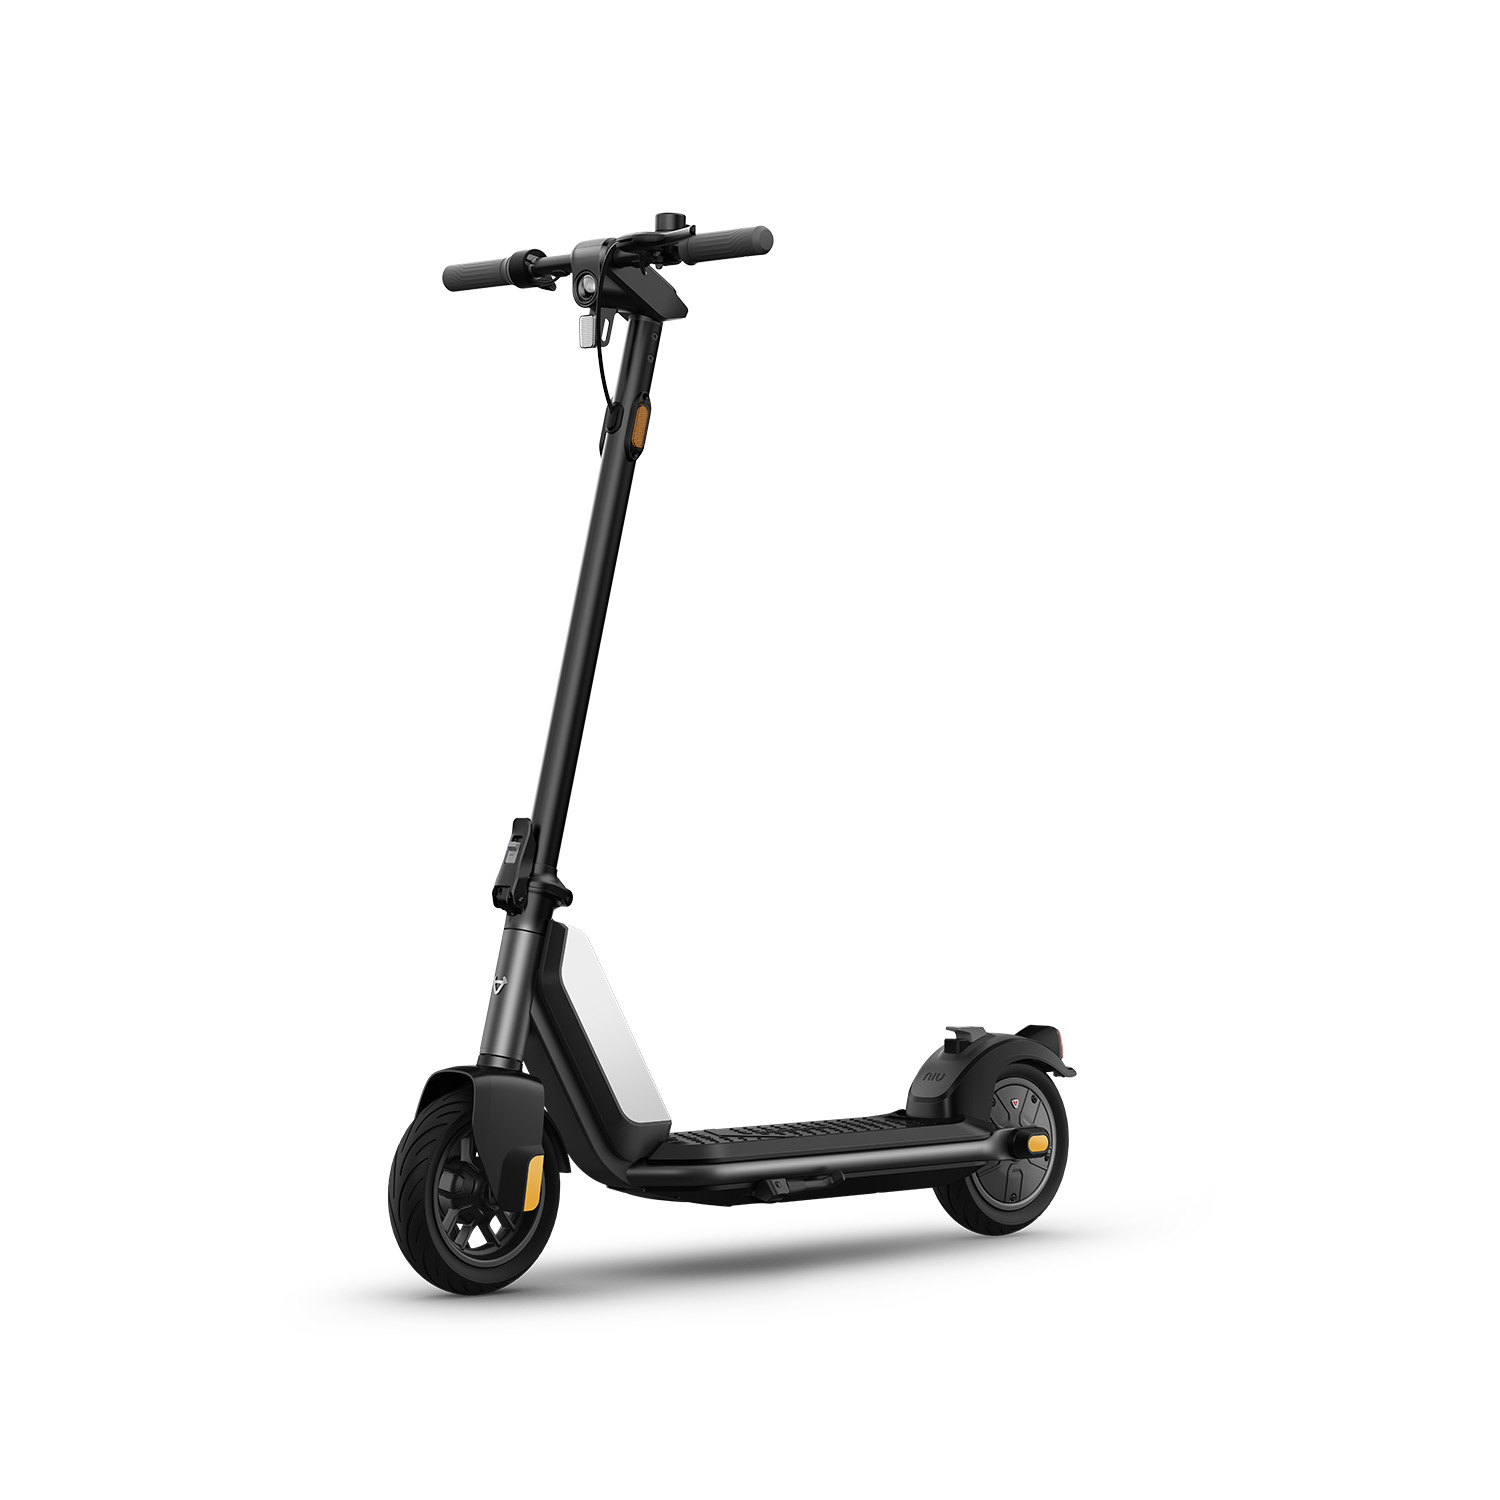 NIU KQi1 Pro Electric kick scooter Foldable Fast 15MPH / 15.5mi distance Charging Battery Commuting - White - image 5 of 7